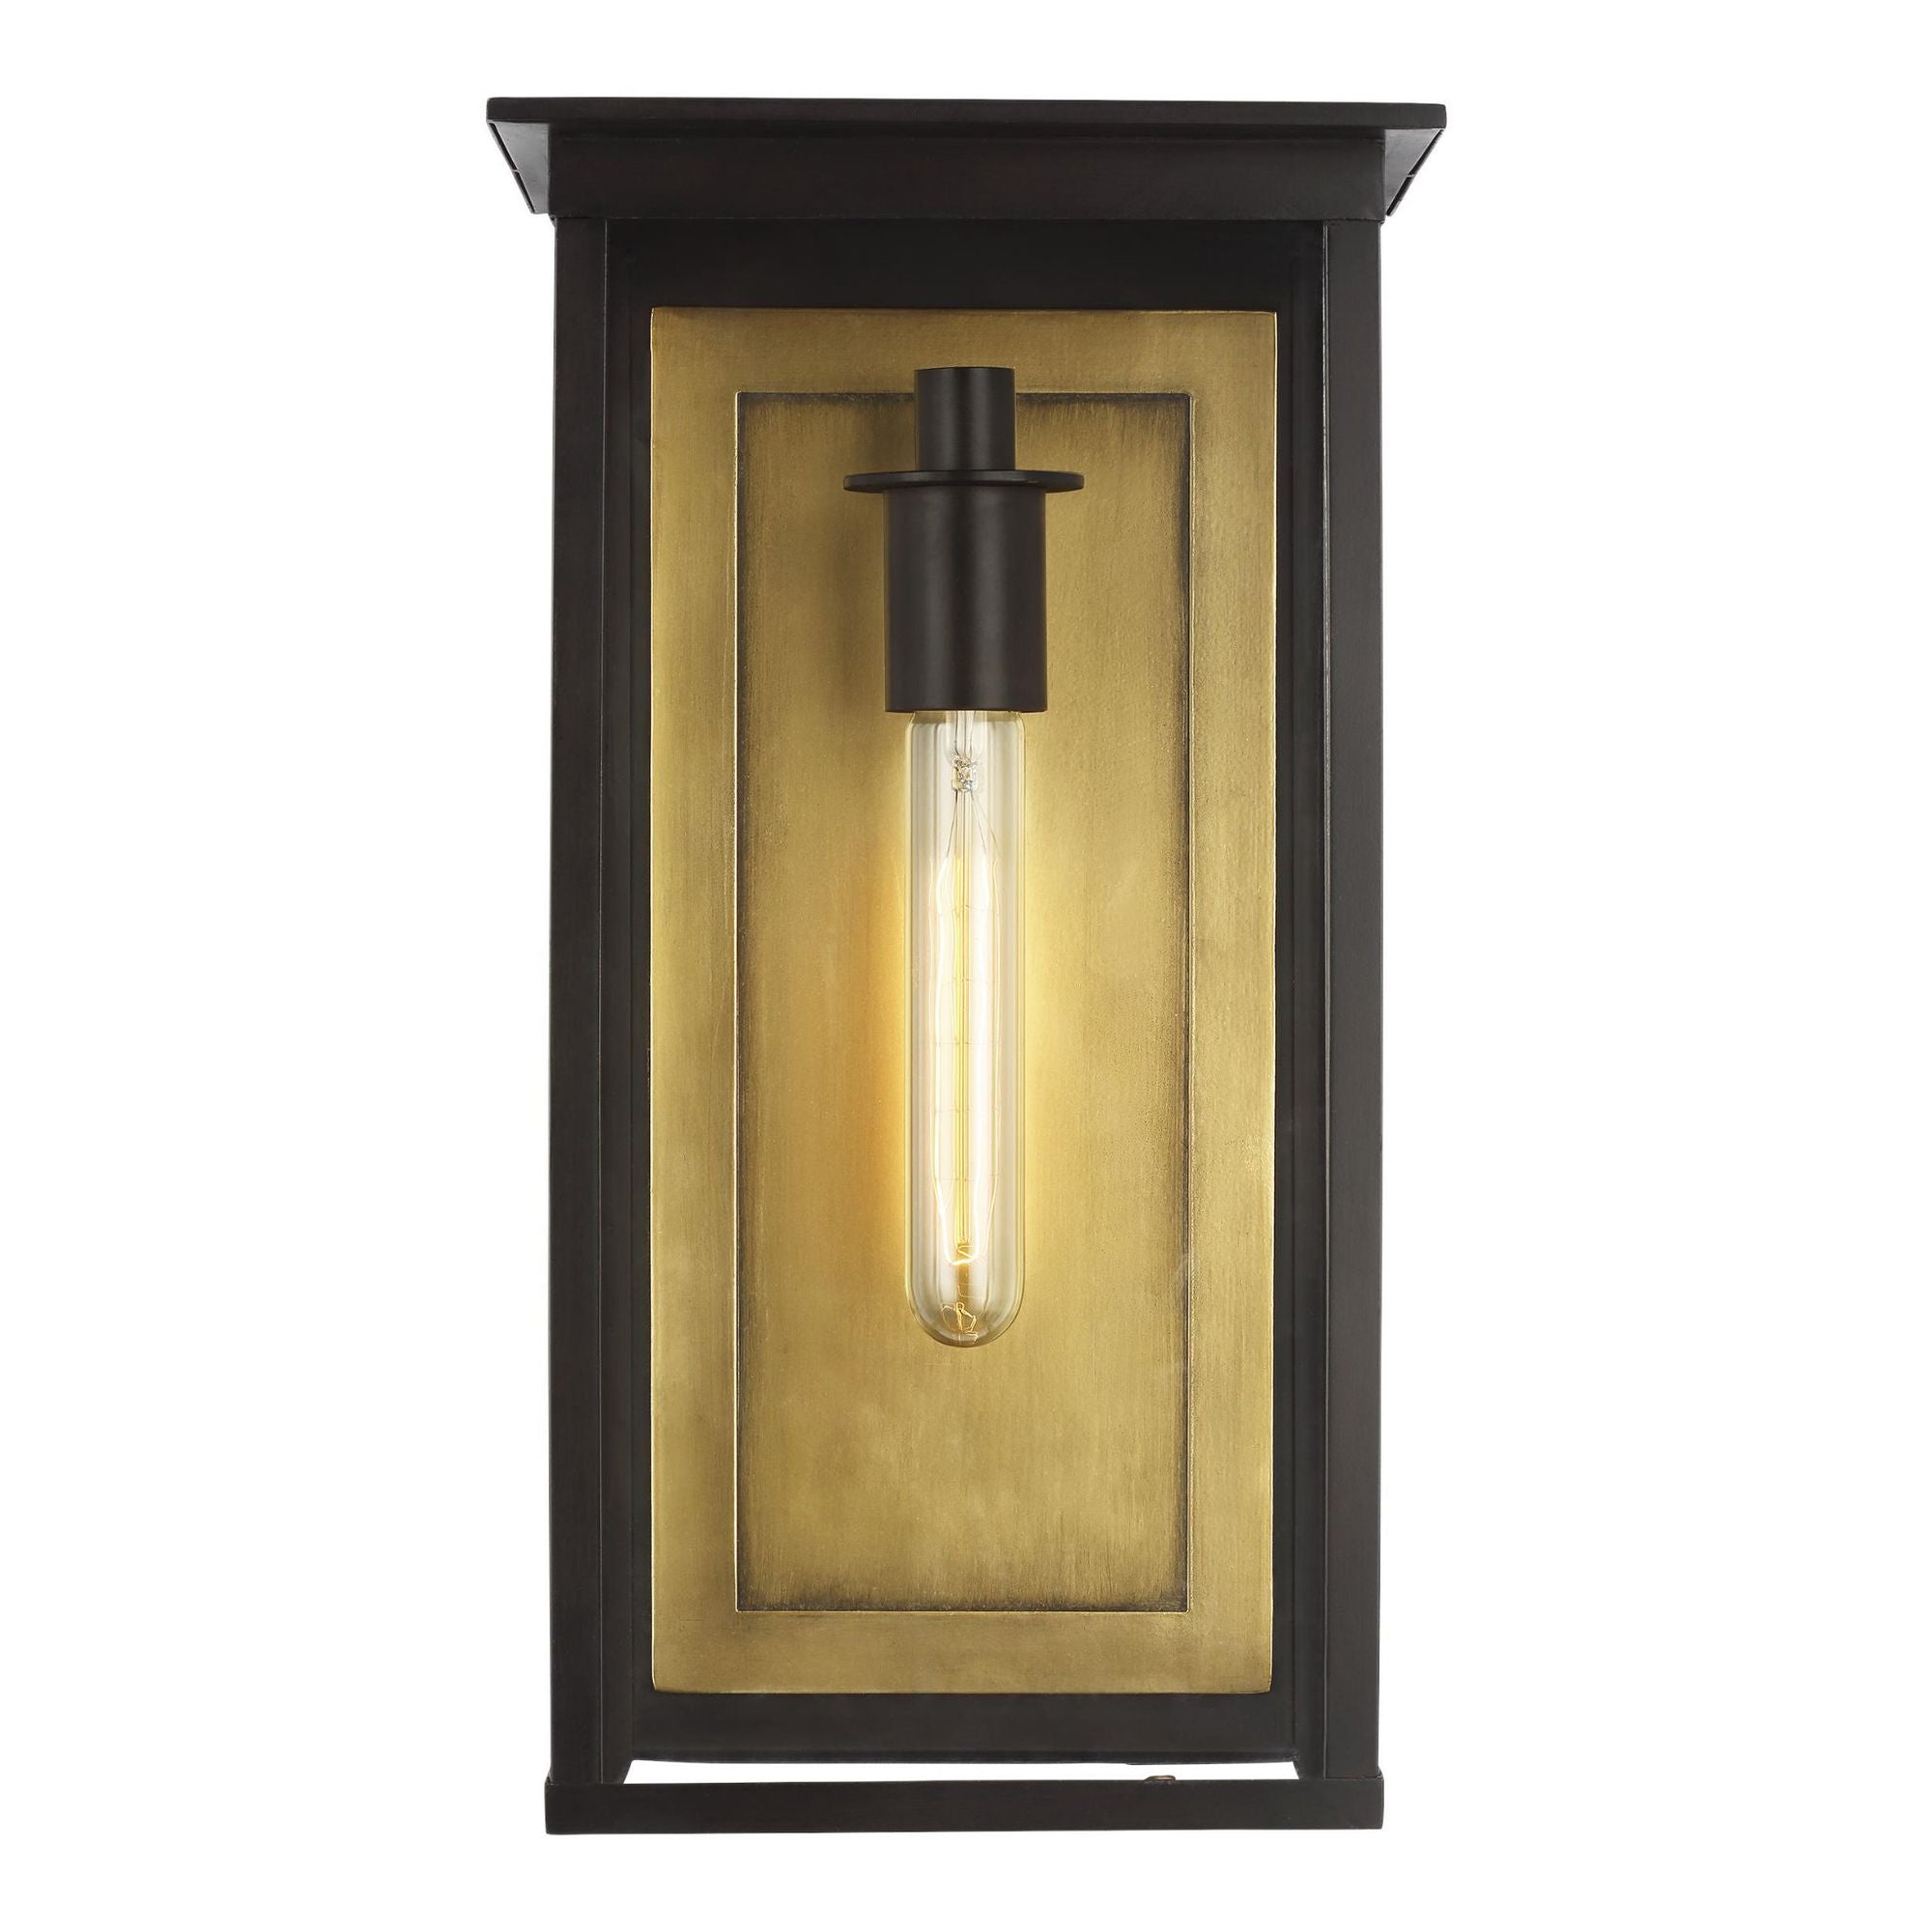 Chapman & Myers Freeport Large Outdoor Wall Lantern in Heritage Copper